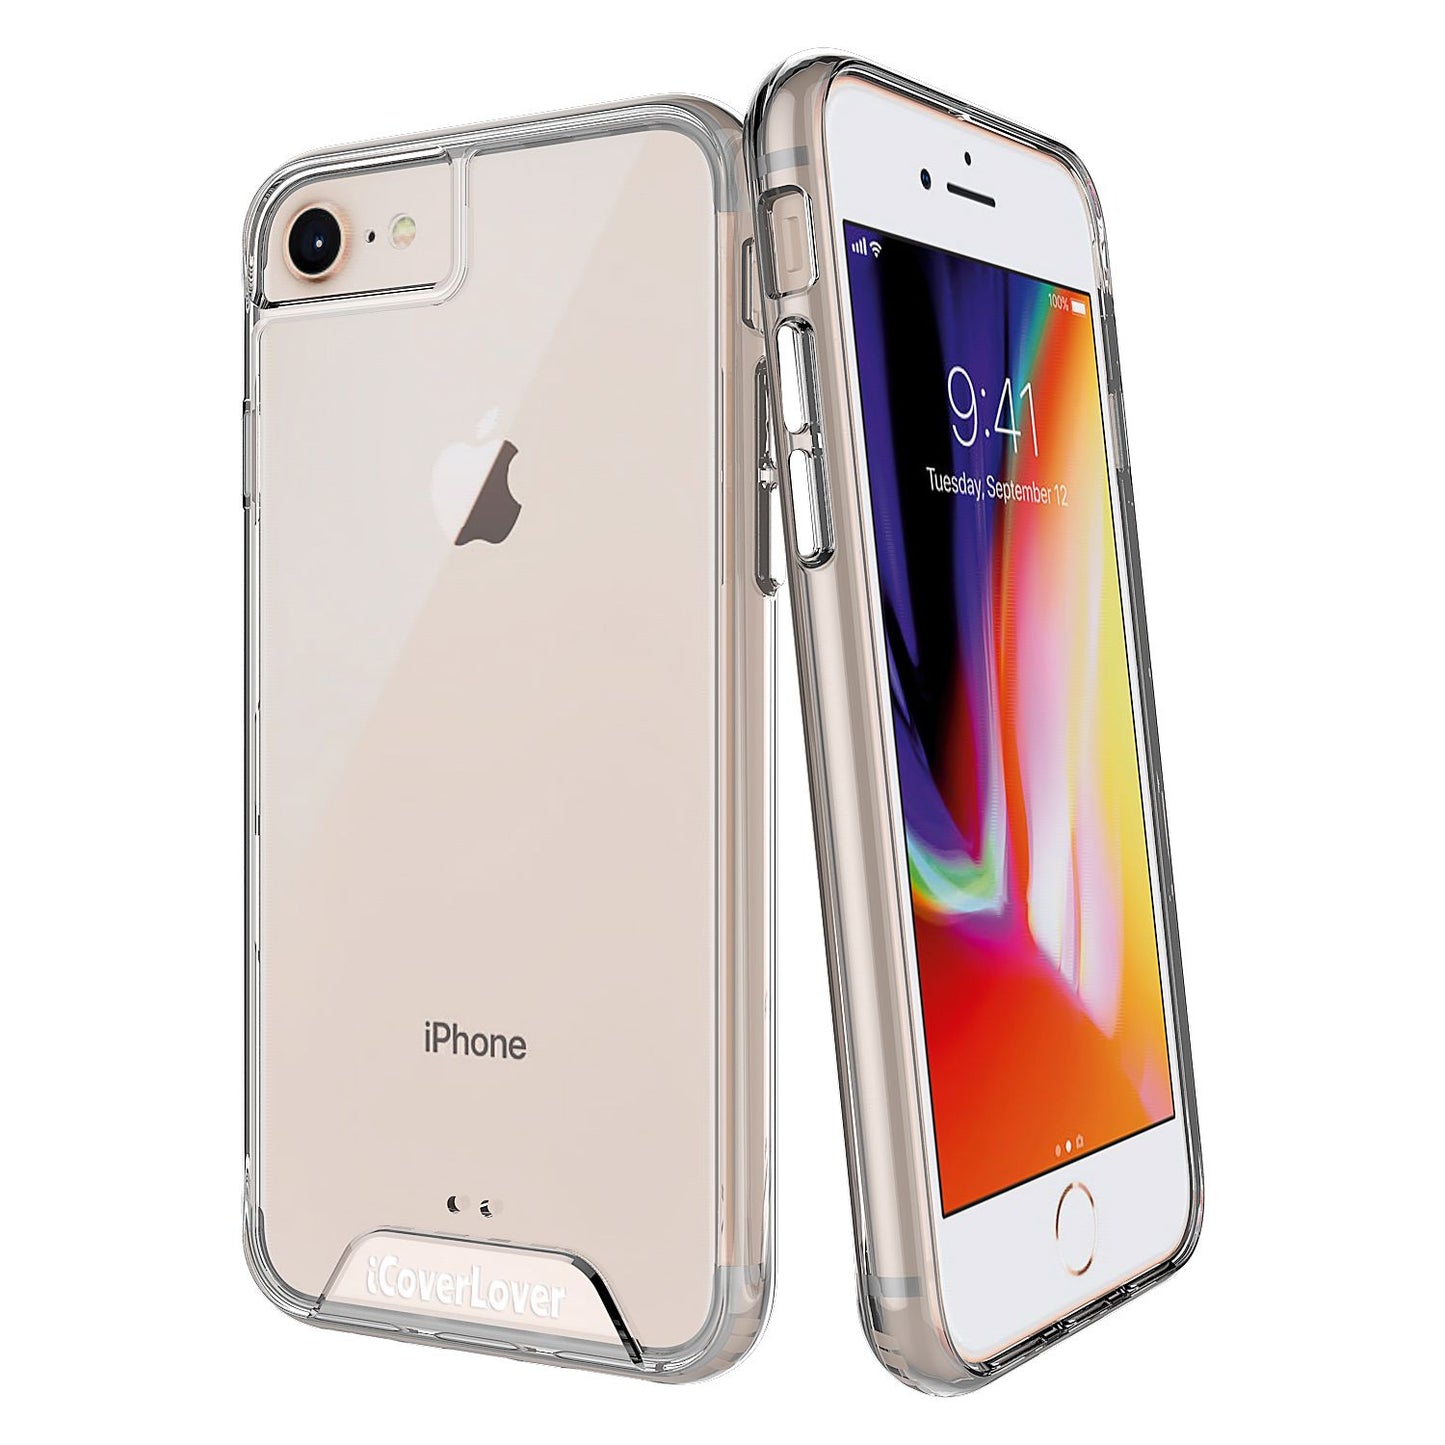 For iPhone SE 5G (2022), SE (2020) / 8 / 7, 6 & 6S Case  Clear Cover Thin Transparent